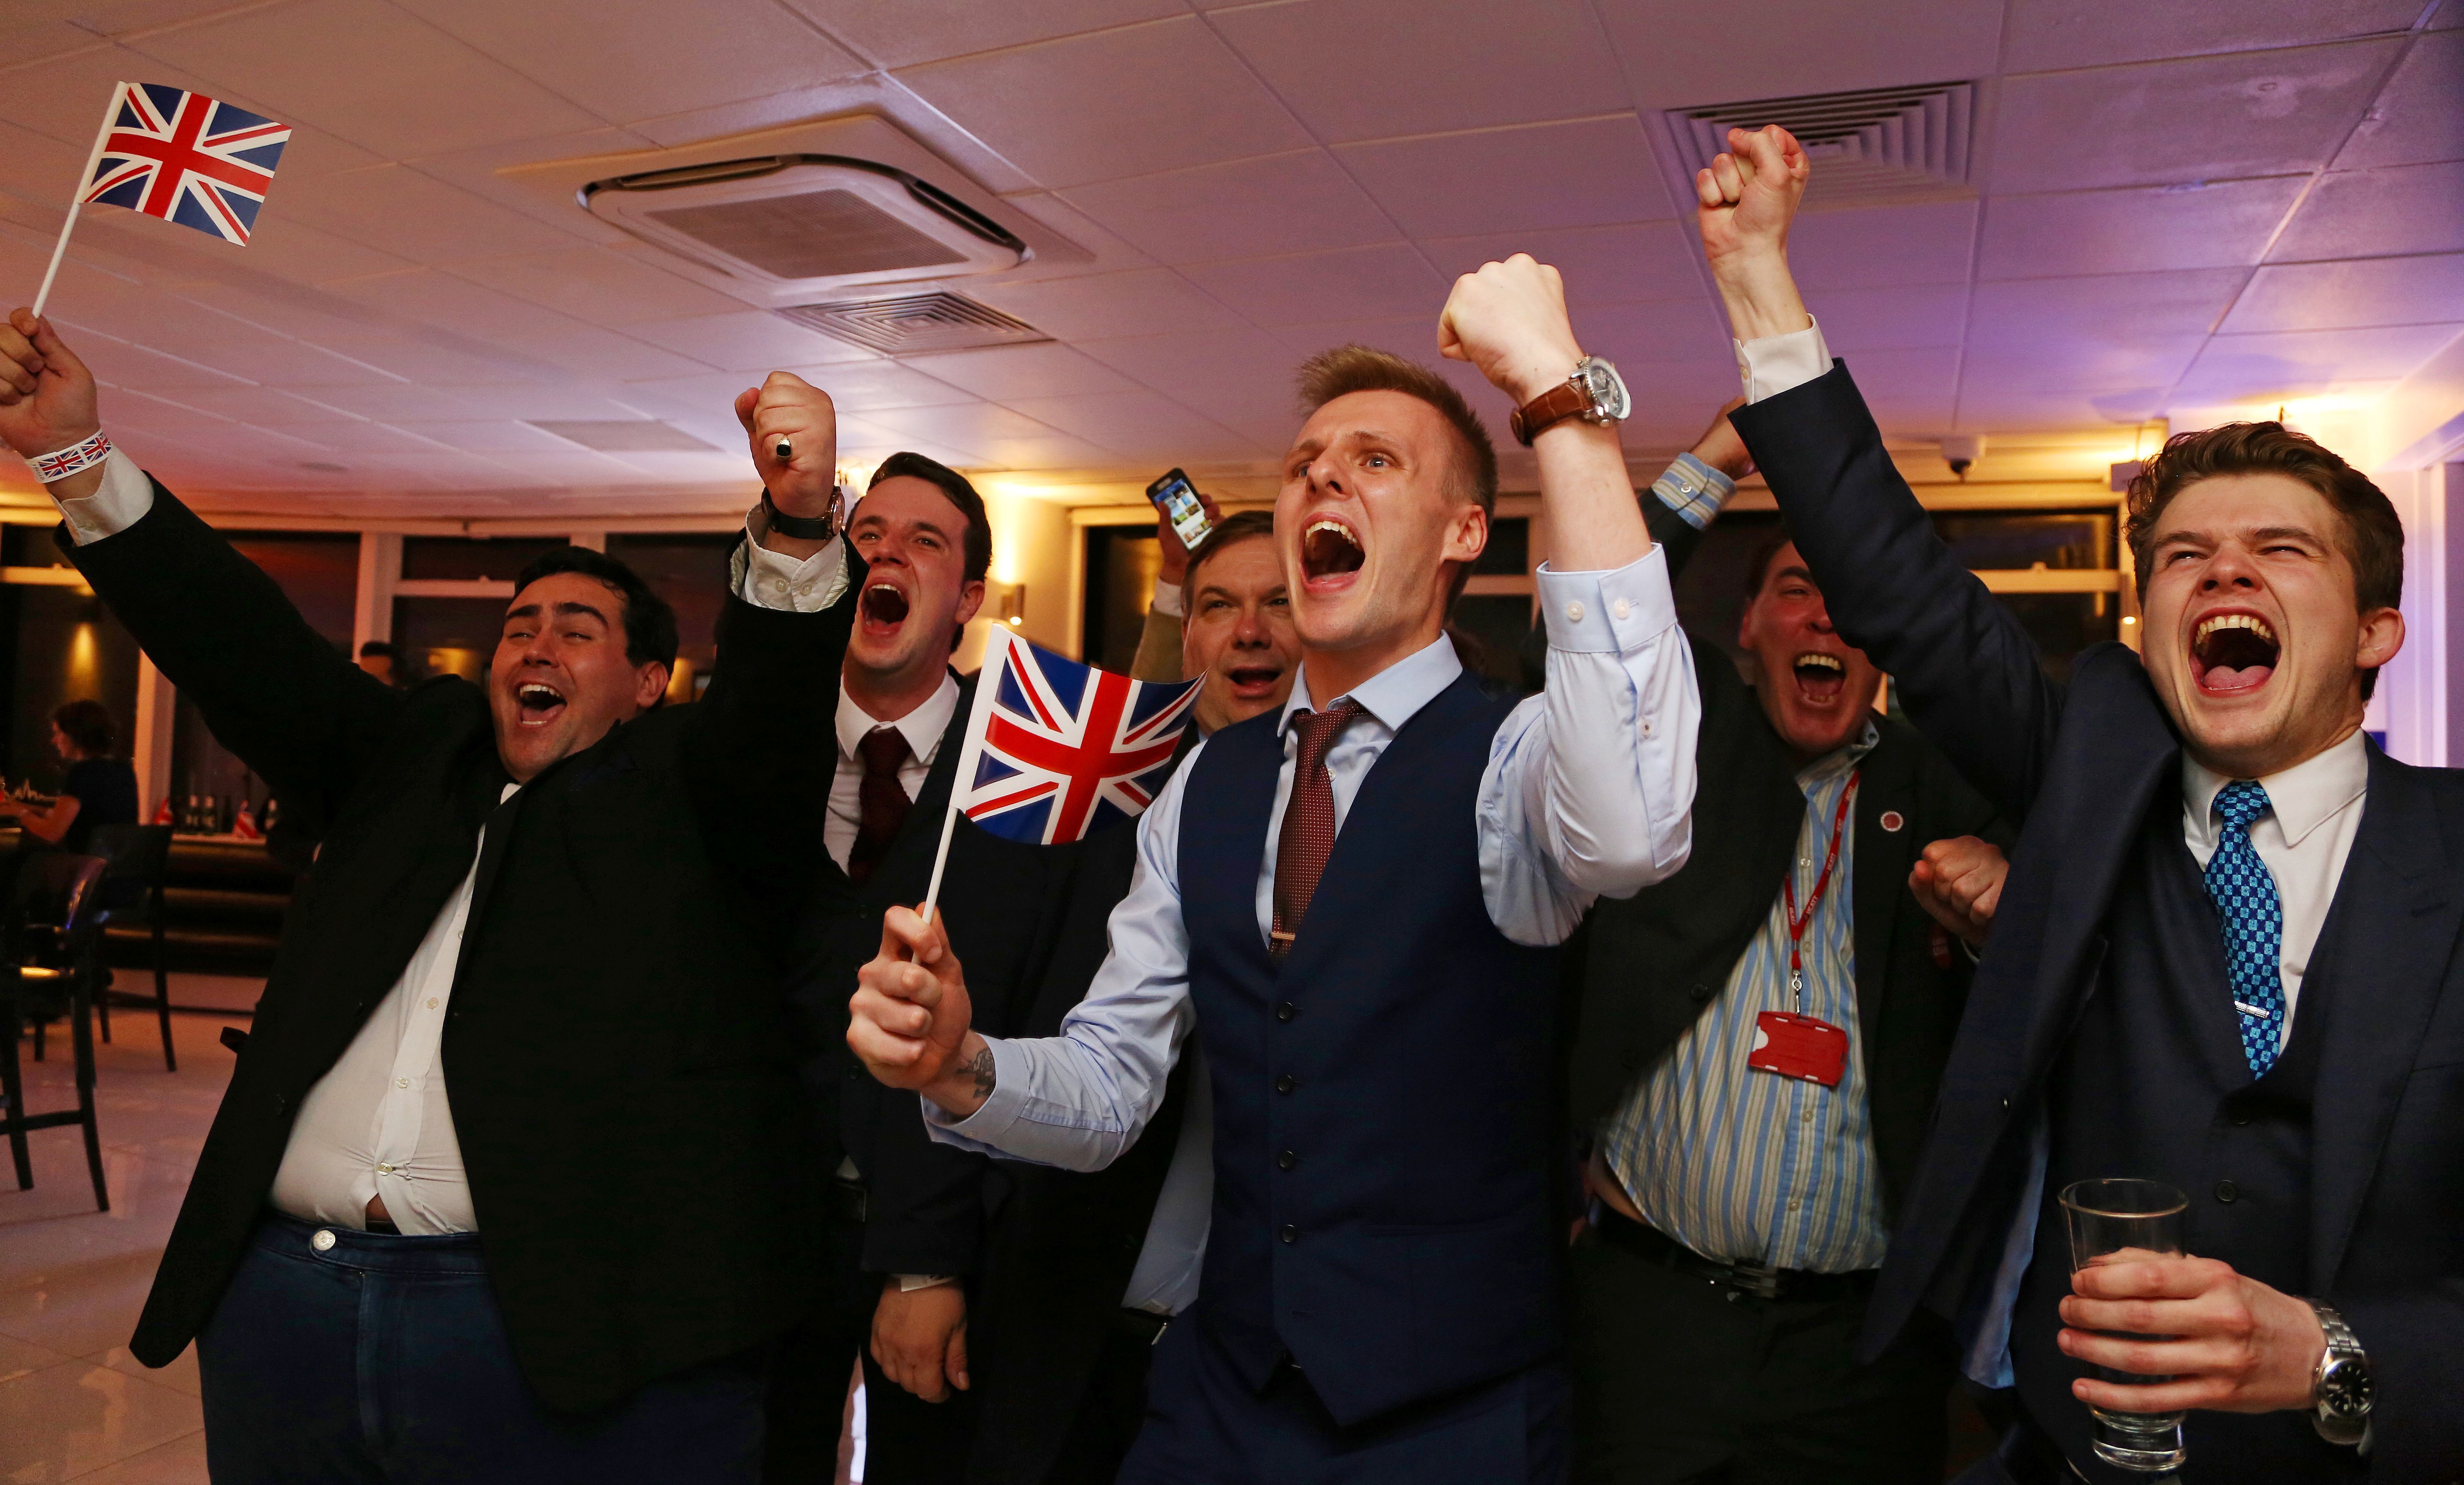 Advocates for the U.K. leaving the EU wave Union flags and cheer as the results come in at the Leave.EU referendum party at Millbank Tower in central London early Friday morning.